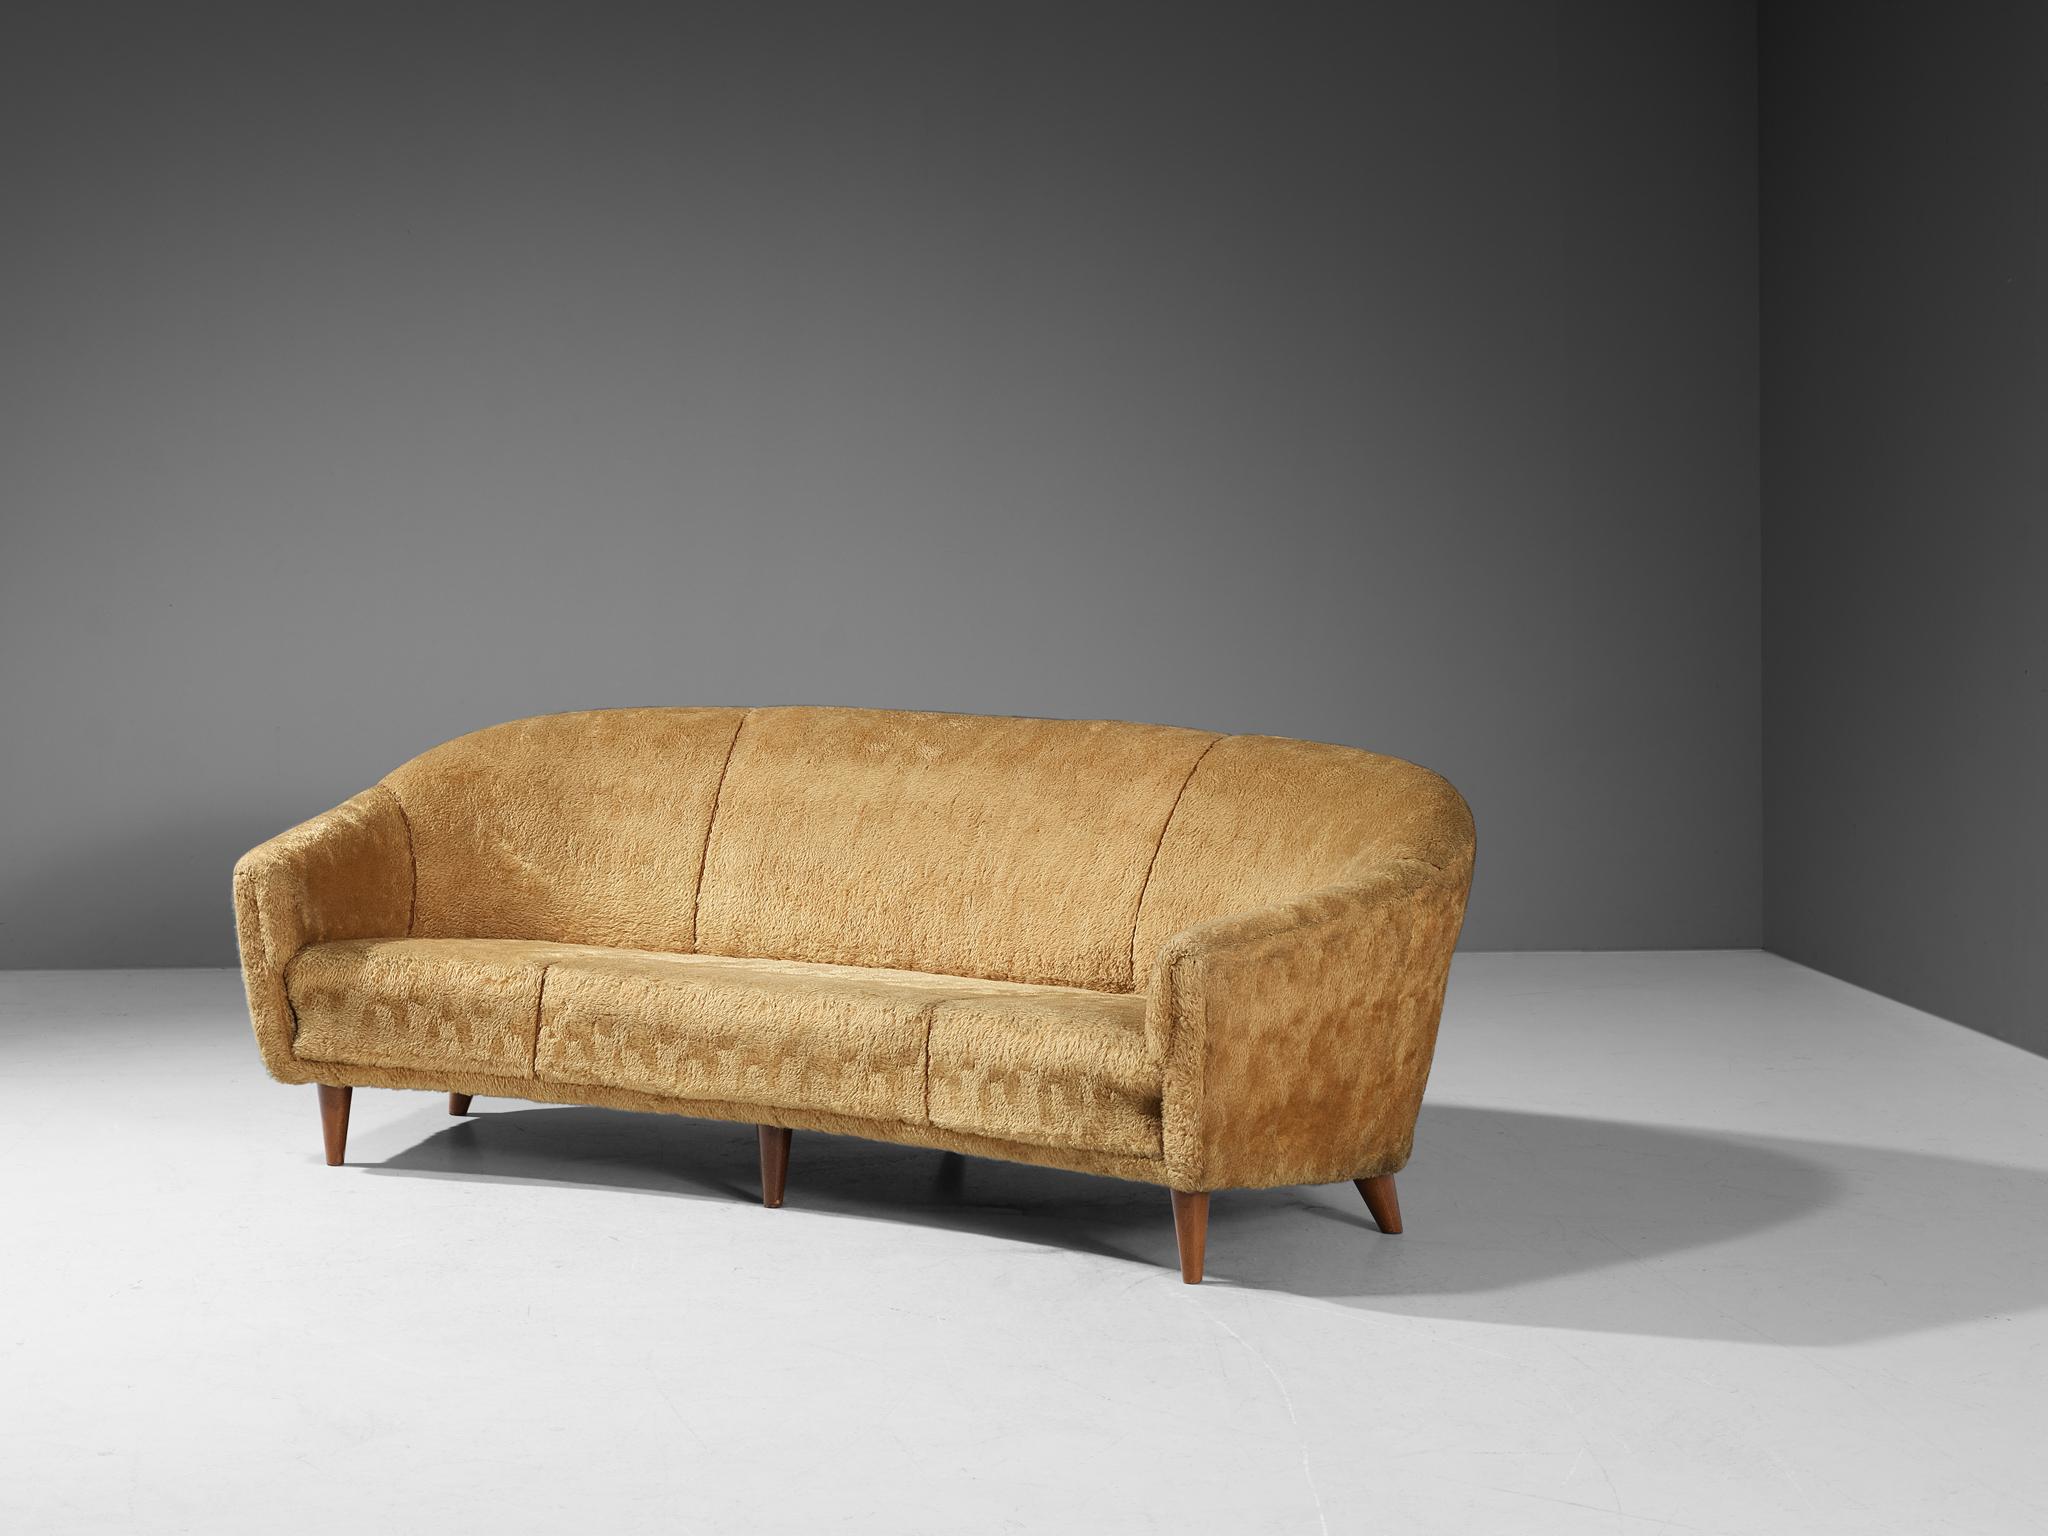 Three-seater sofa, teddy upholstery and beech, Europe, 1950s

This voluptuous sofa is executed with wooden legs and a yellow teddy upholstery. The sofa has a high lined and slightly curved back, while the backrest is horizontal straight and flows